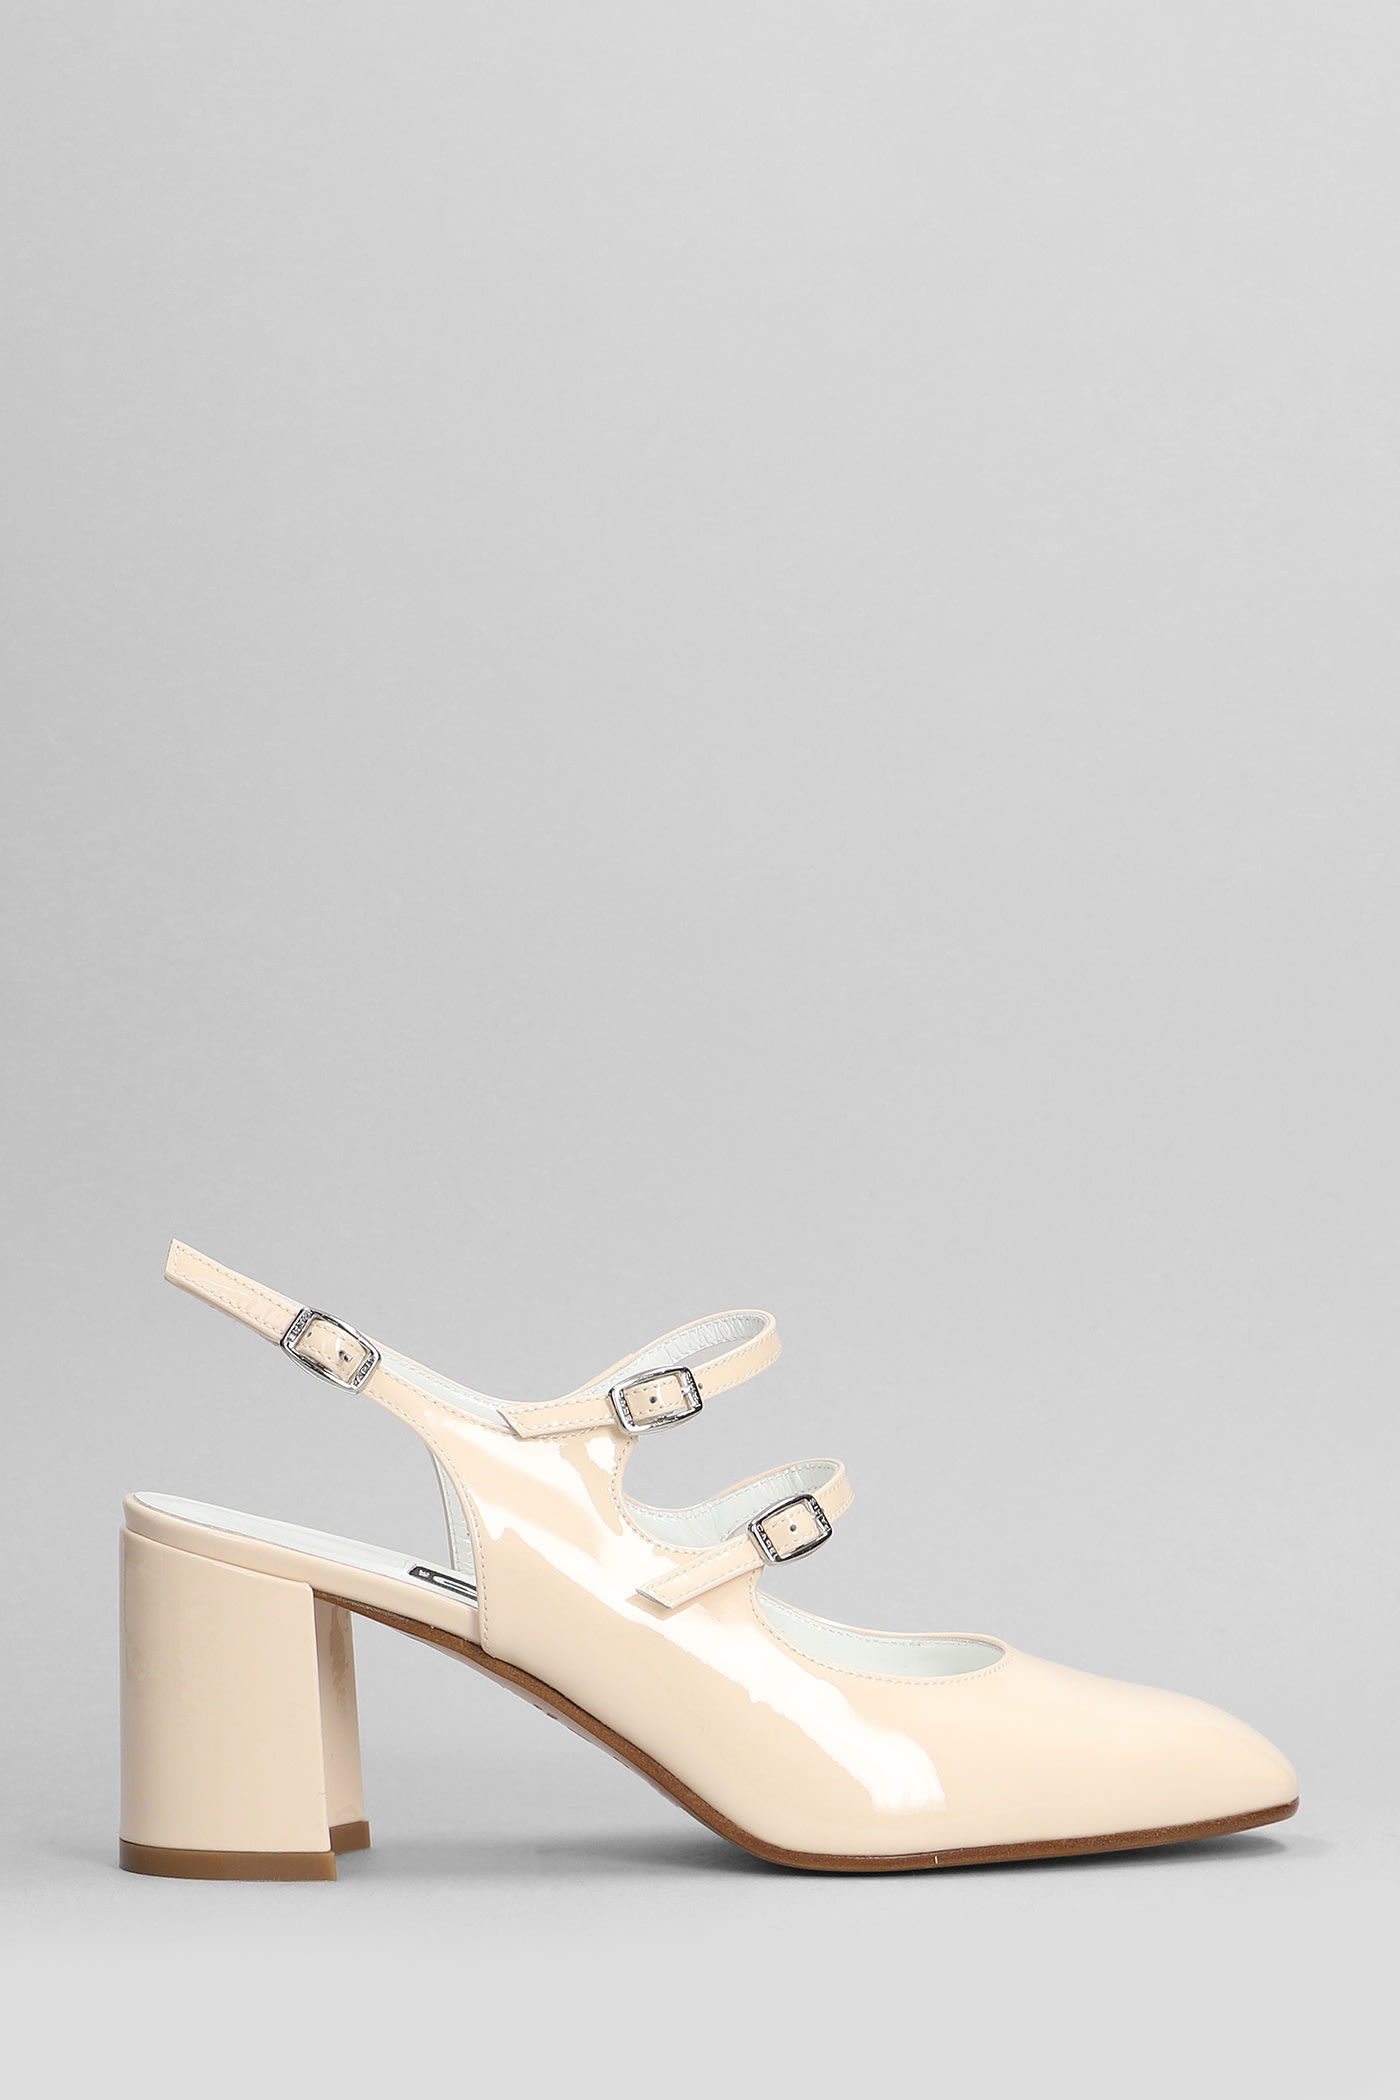 Banana Pumps In Beige Patent Leather